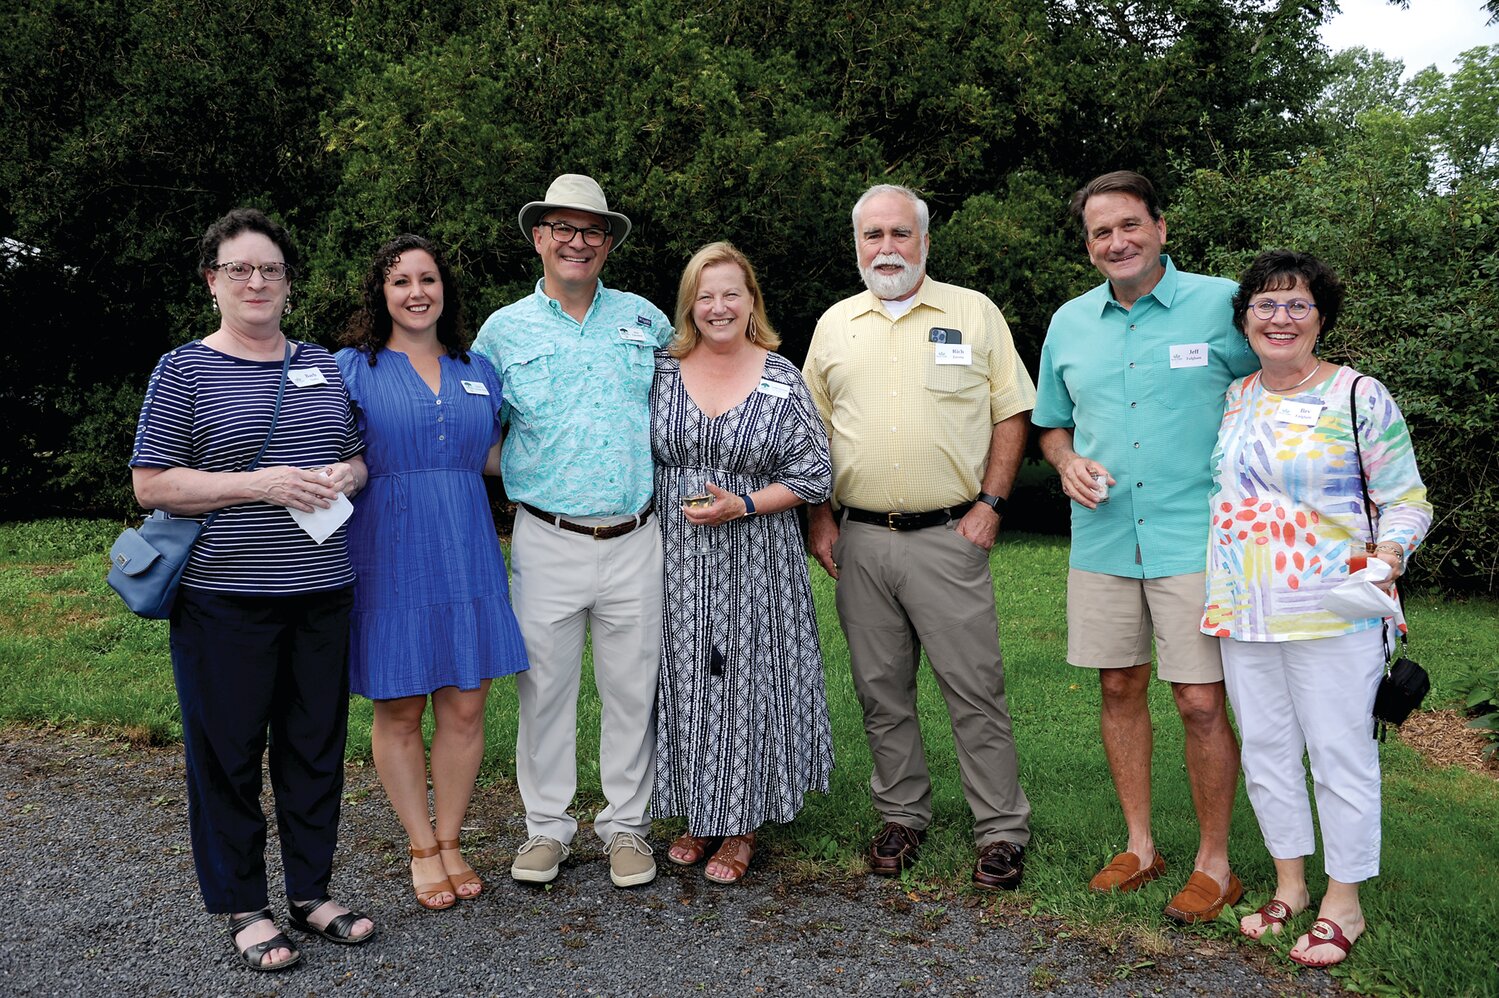 Barb Stoltz, Katie Paone-Kulp, Phil and Linda Cacossa, Rich Zavetta, and  Jeff and Bev Fulgham.